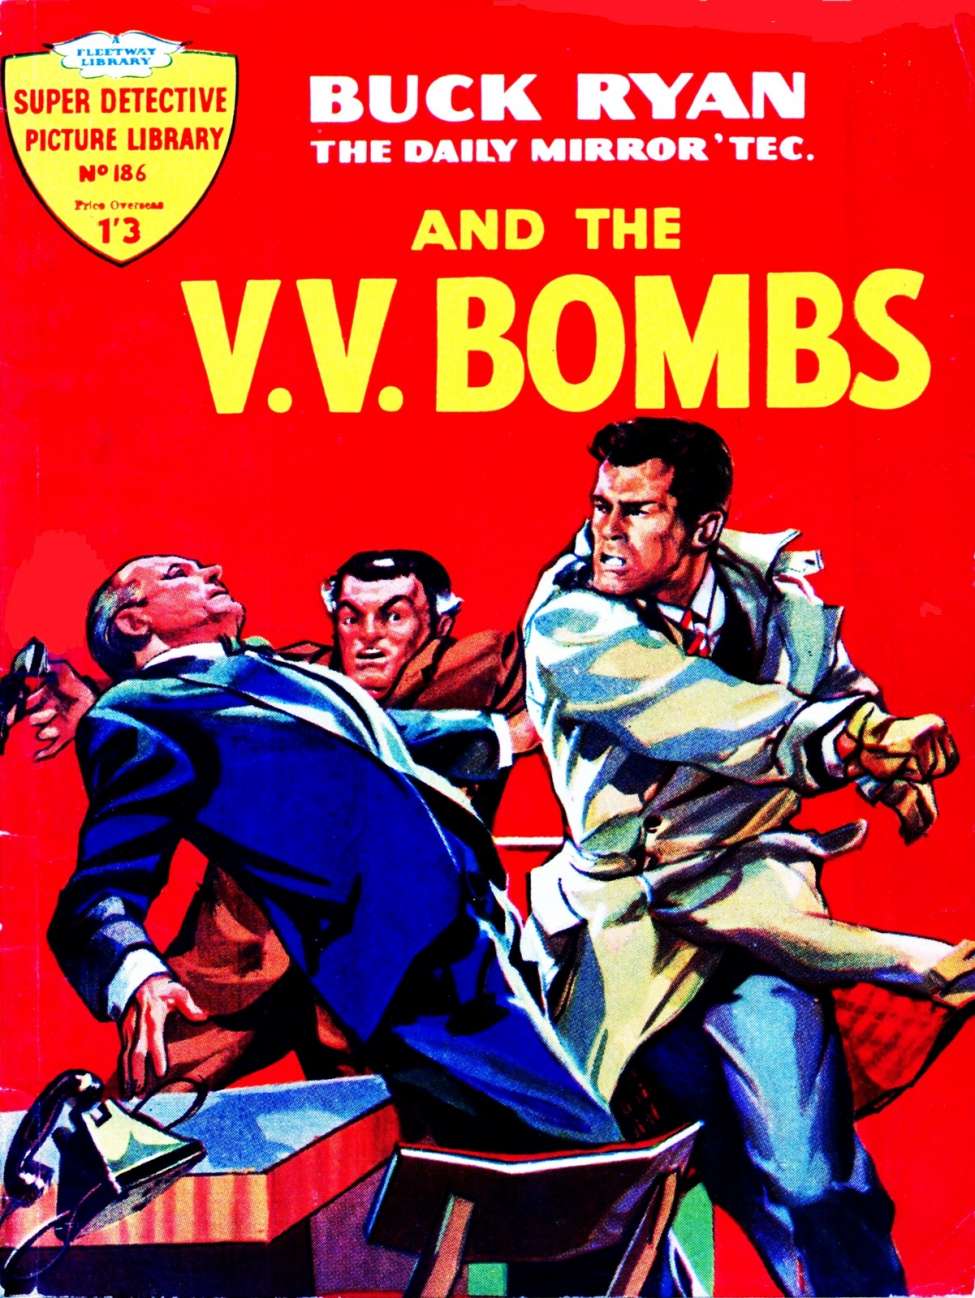 Book Cover For Super Detective Library 186 - Buck Ryan And The V.V. Bombs